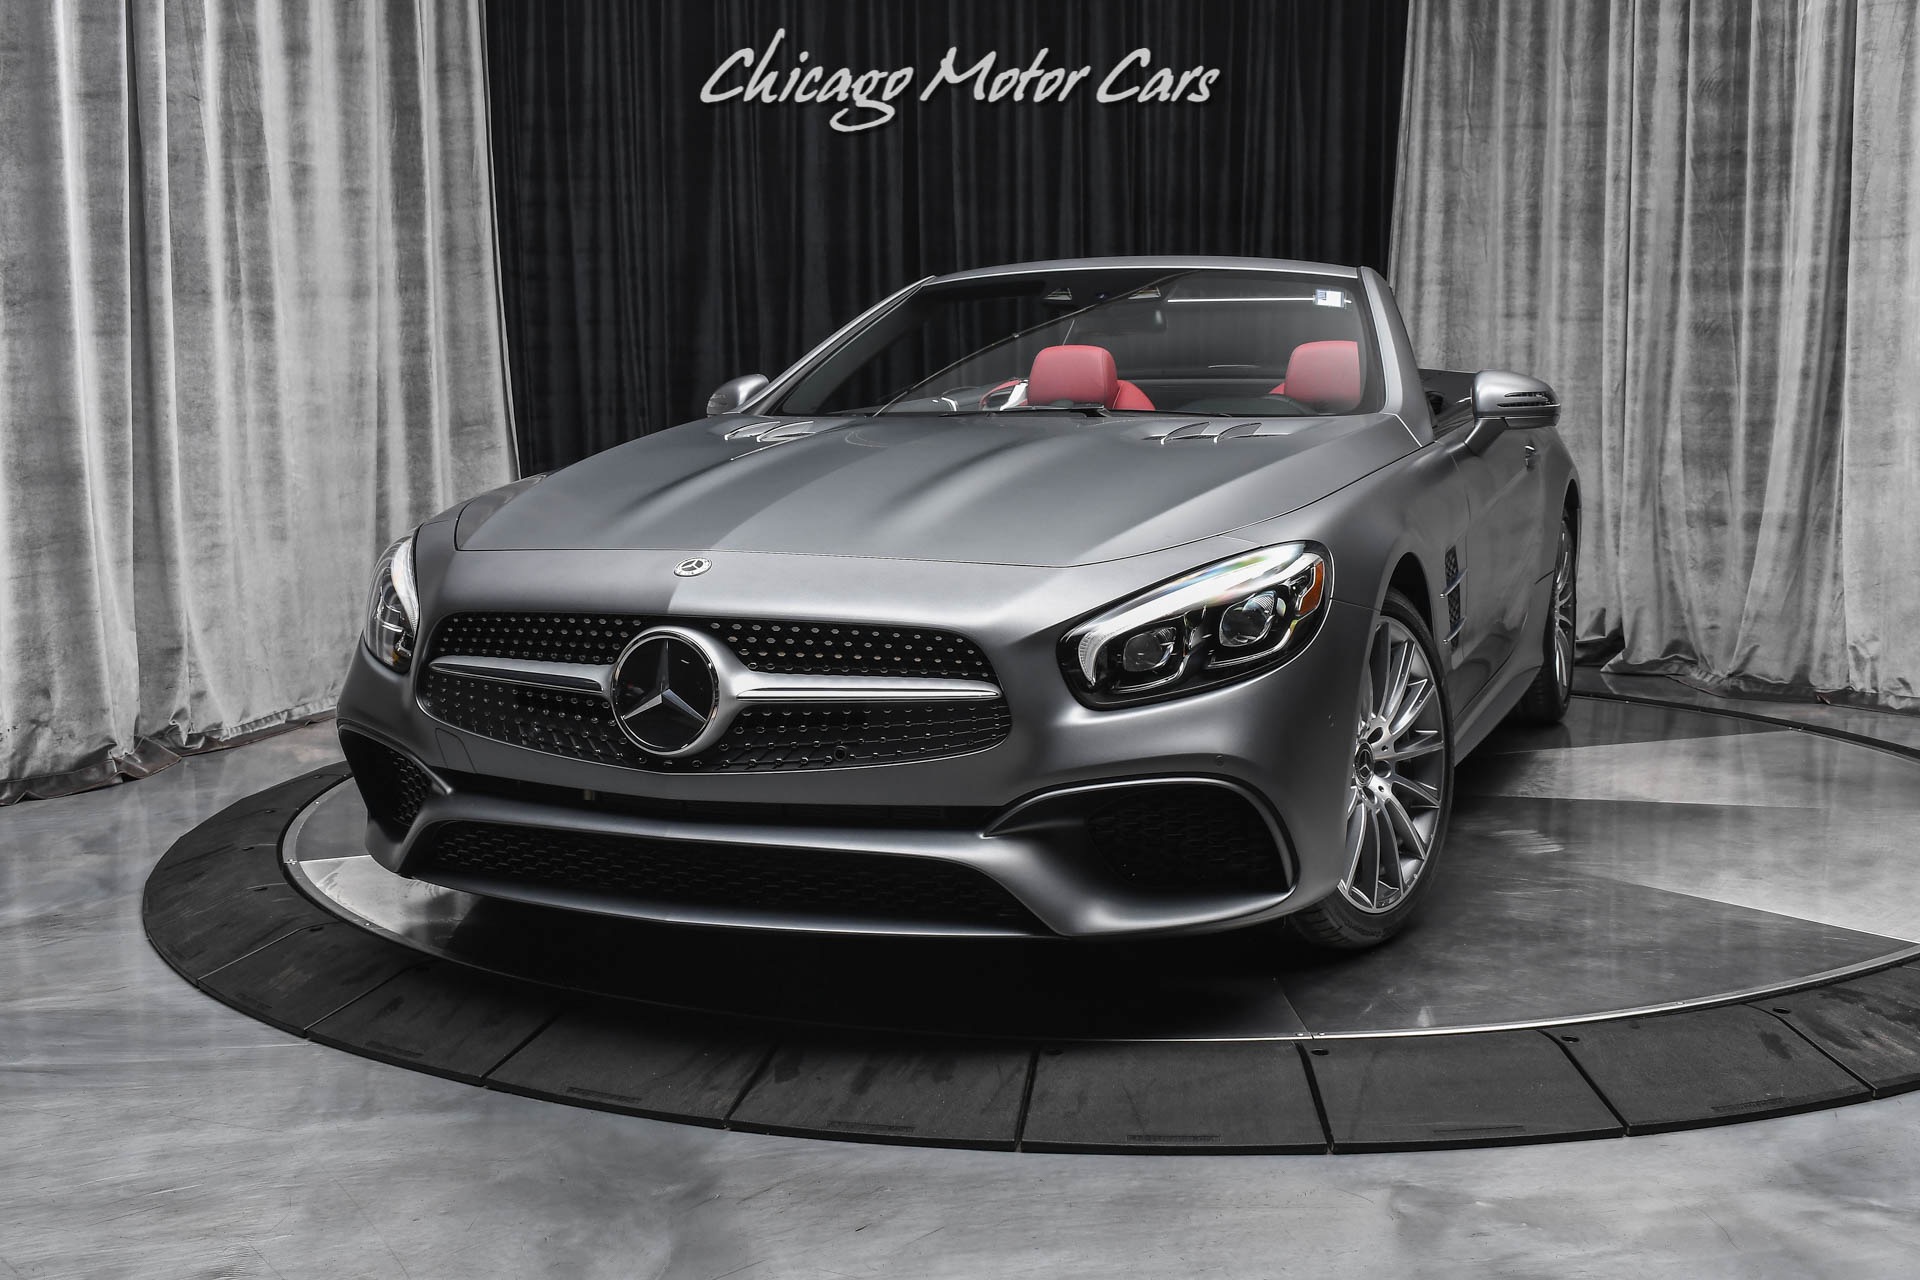 Used 2020 Mercedes-Benz SL450 Convertible Only 65 Miles Great Spec LIKE  BRAND NEW! For Sale (Special Pricing) | Chicago Motor Cars Stock #17681